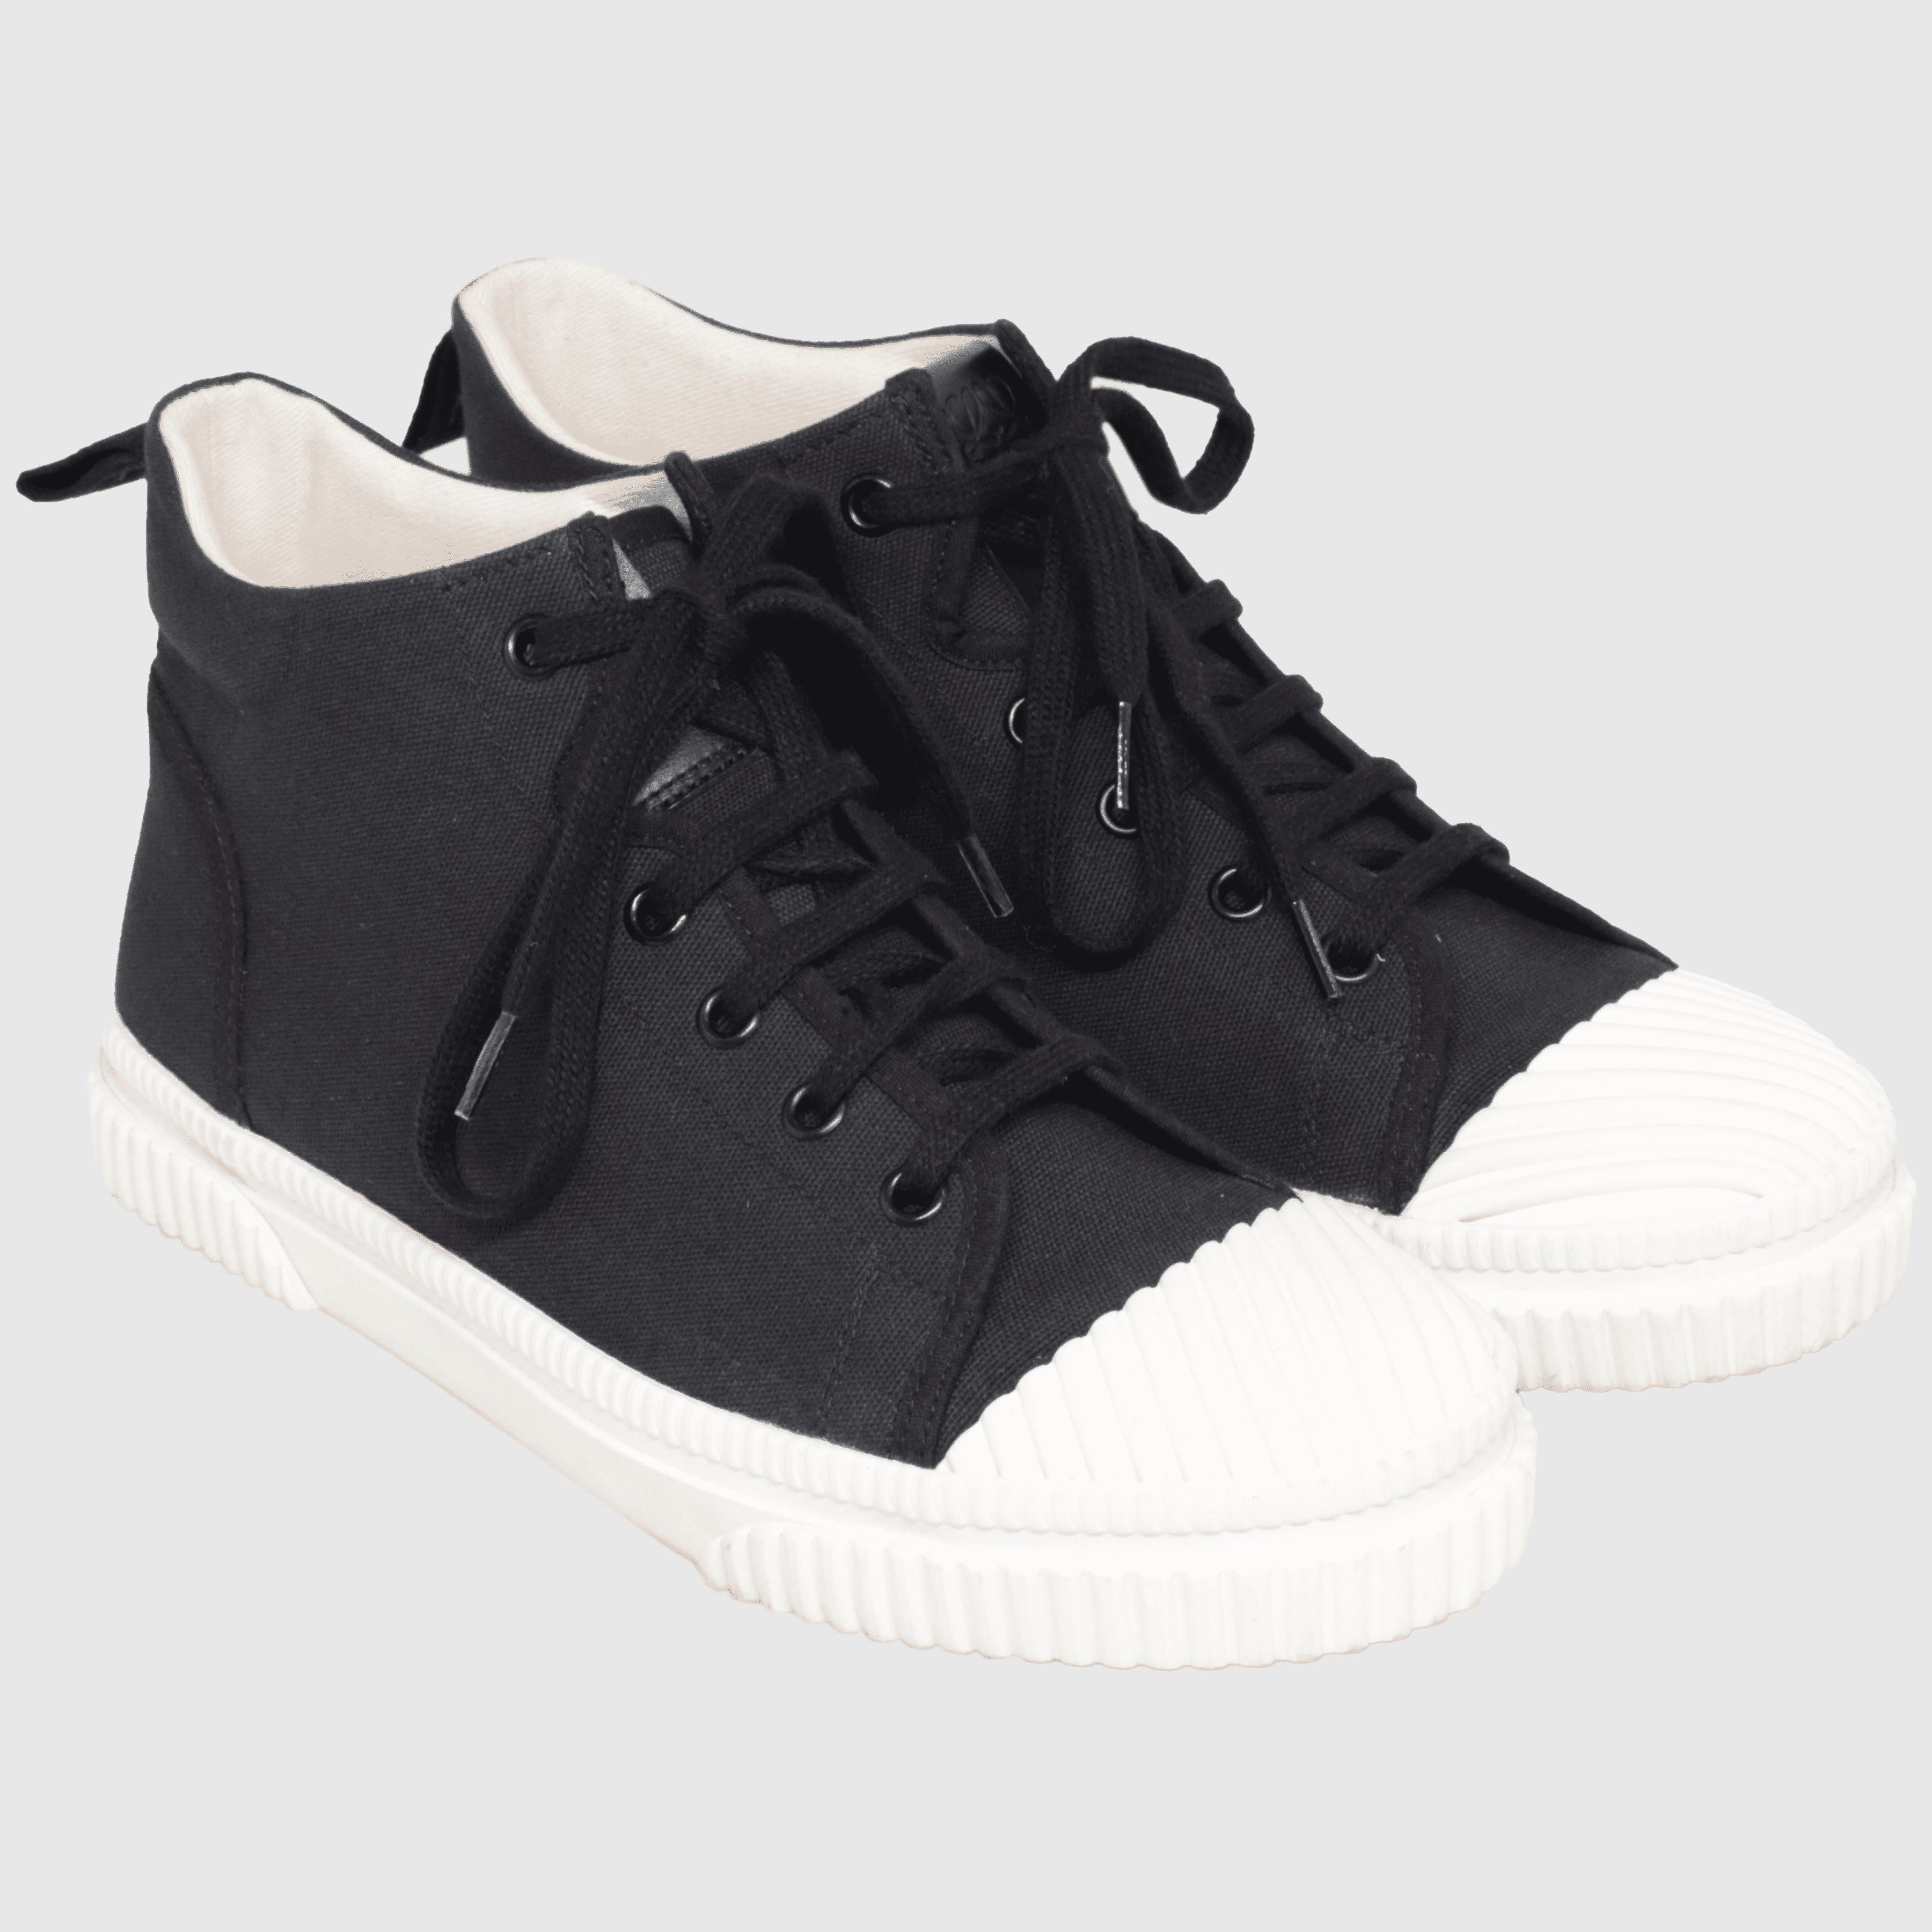 Black/White Mid Rise Lace up Sneakers Shoes Loewe 